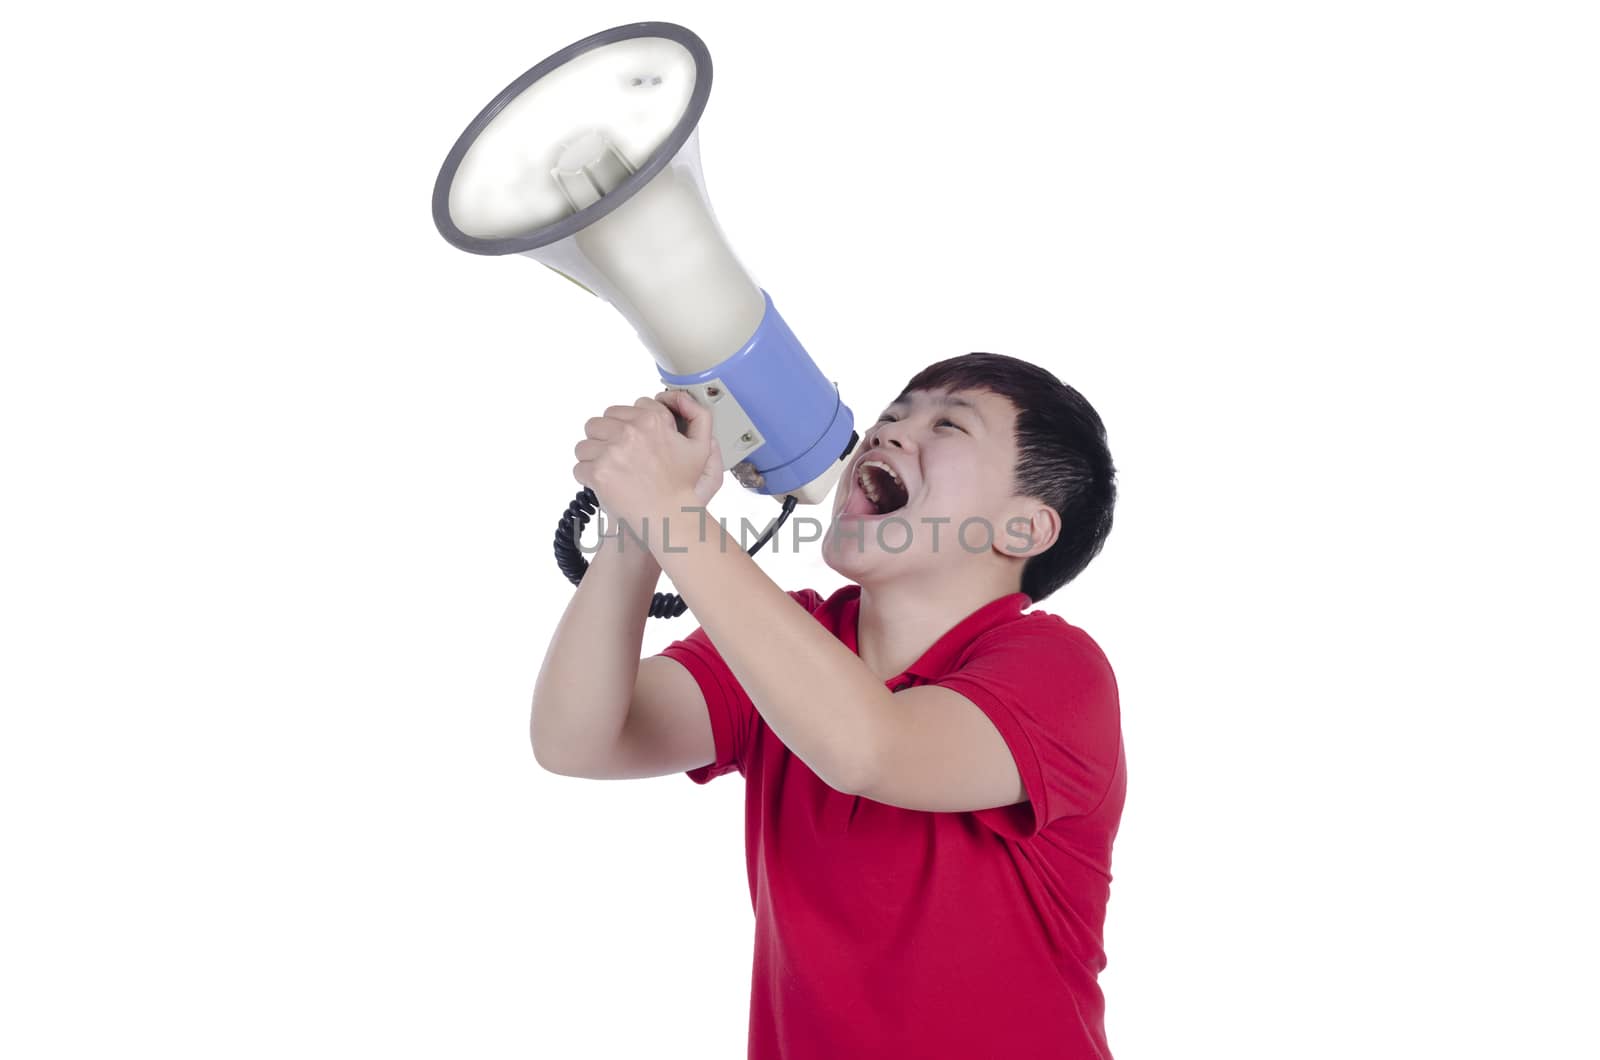 Student shouting through megaphone with white background